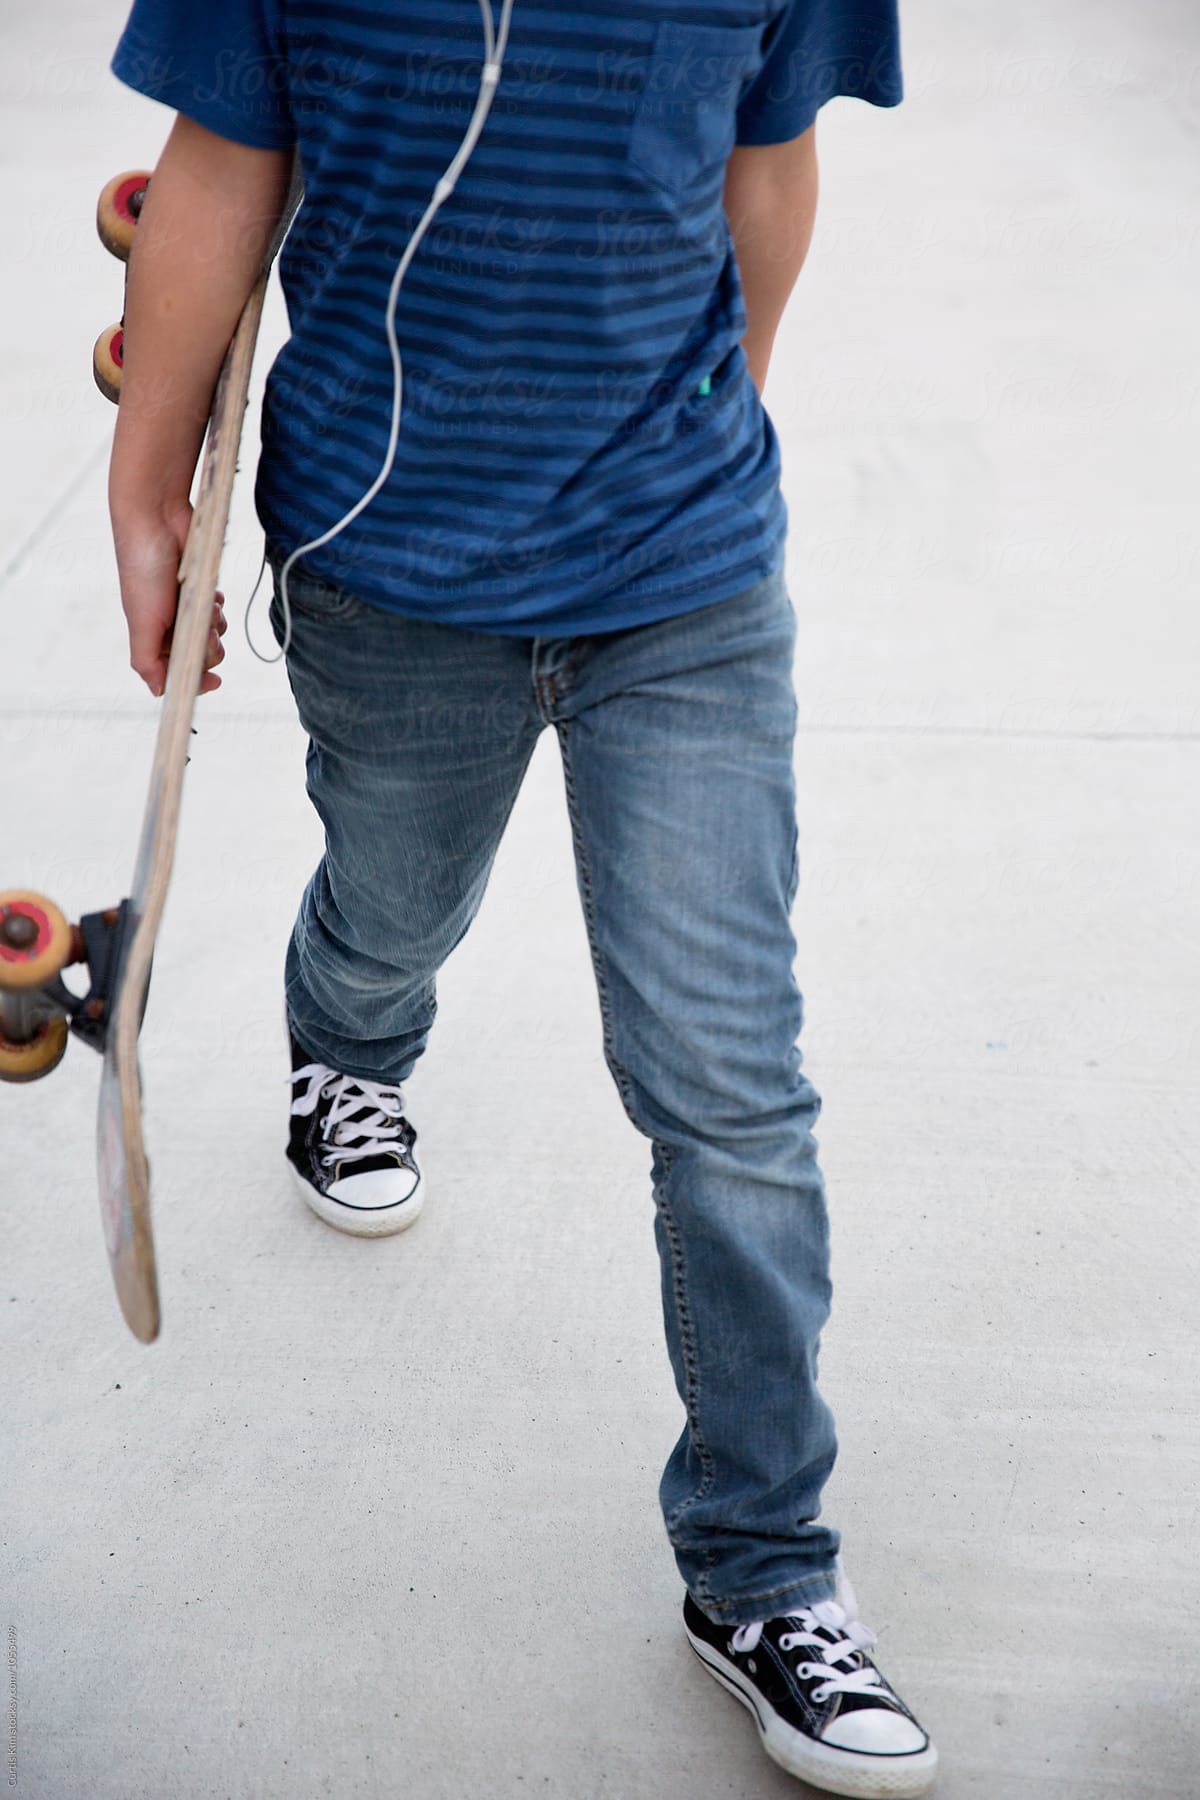 Walking while listening to music and holding his skateboard